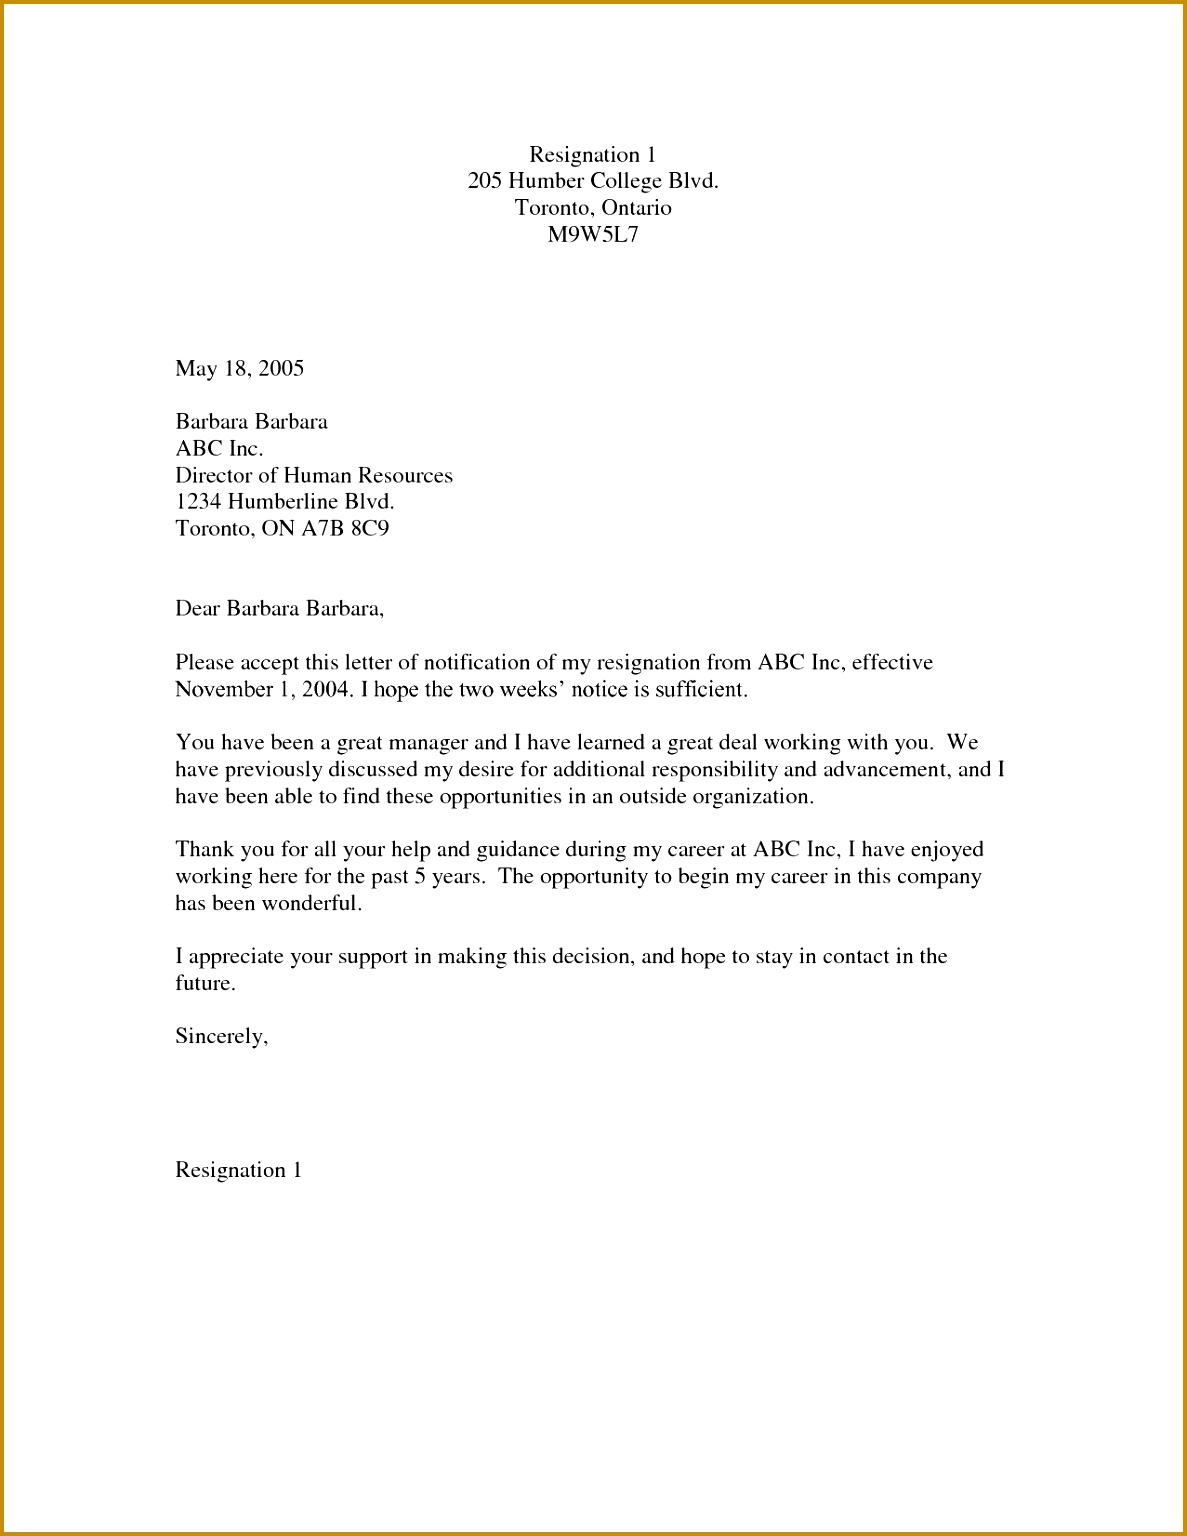 6 Resignation Letter Due to Relocation Sample | FabTemplatez